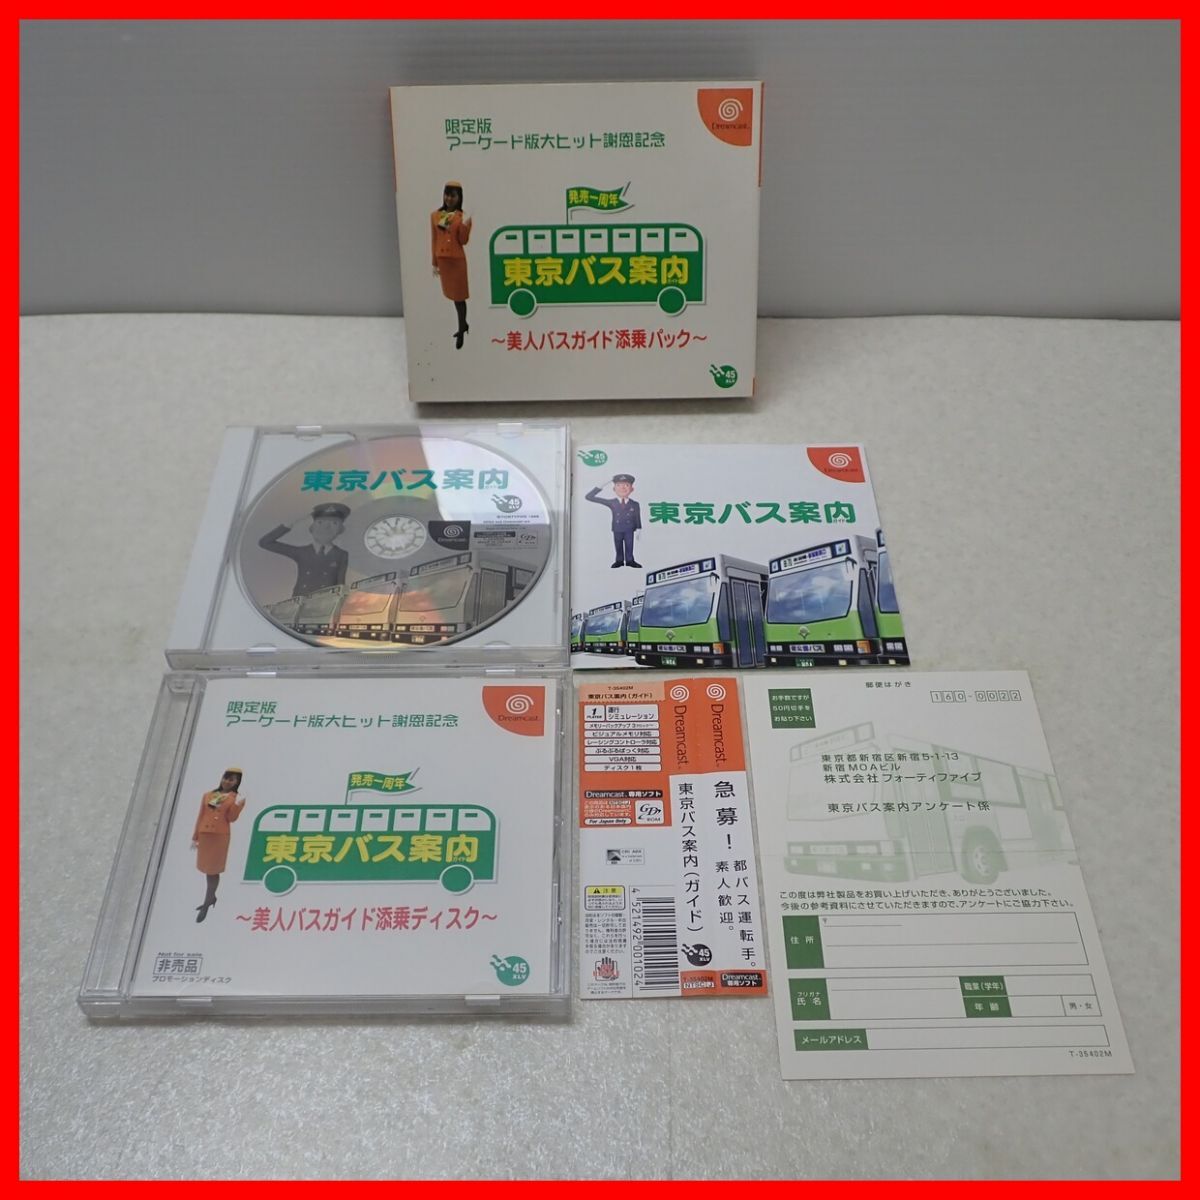 * operation guarantee goods DC Dreamcast limitation version arcade version large hit gratitude memory Tokyo bus guide beautiful person bus guide .. pack FORTYFIVE box opinion with belt [PP